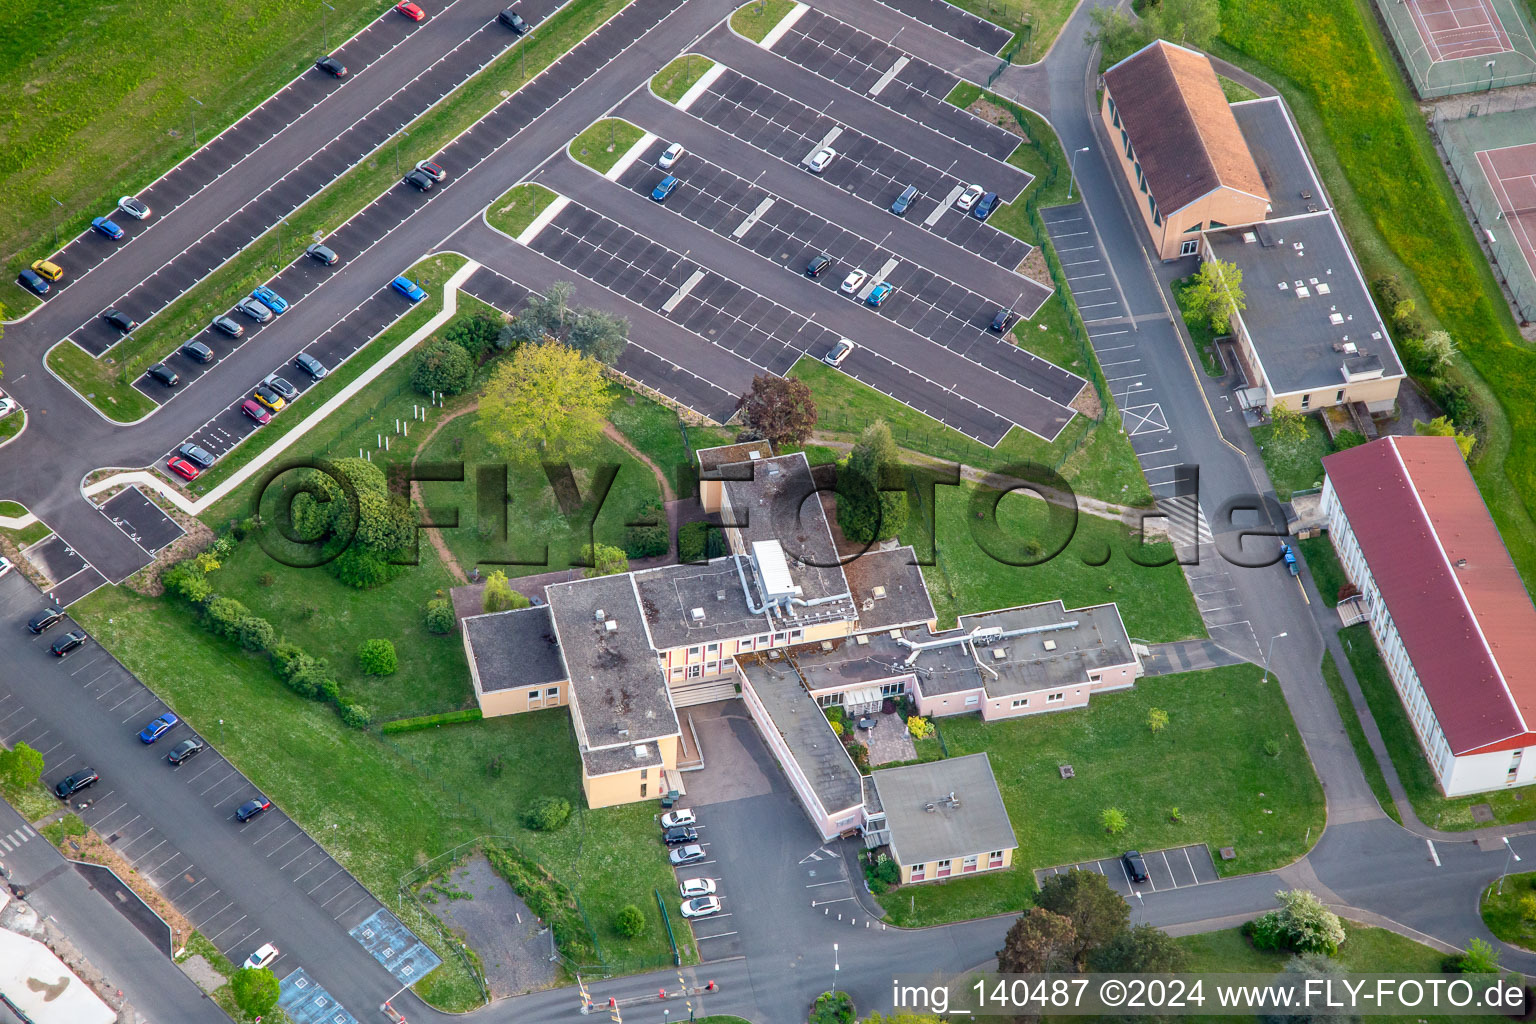 Aerial view of Hospital Robert-Pax in the district Zone Industrielle du Grand Bois Fayencerie in Saargemünd in the state Moselle, France